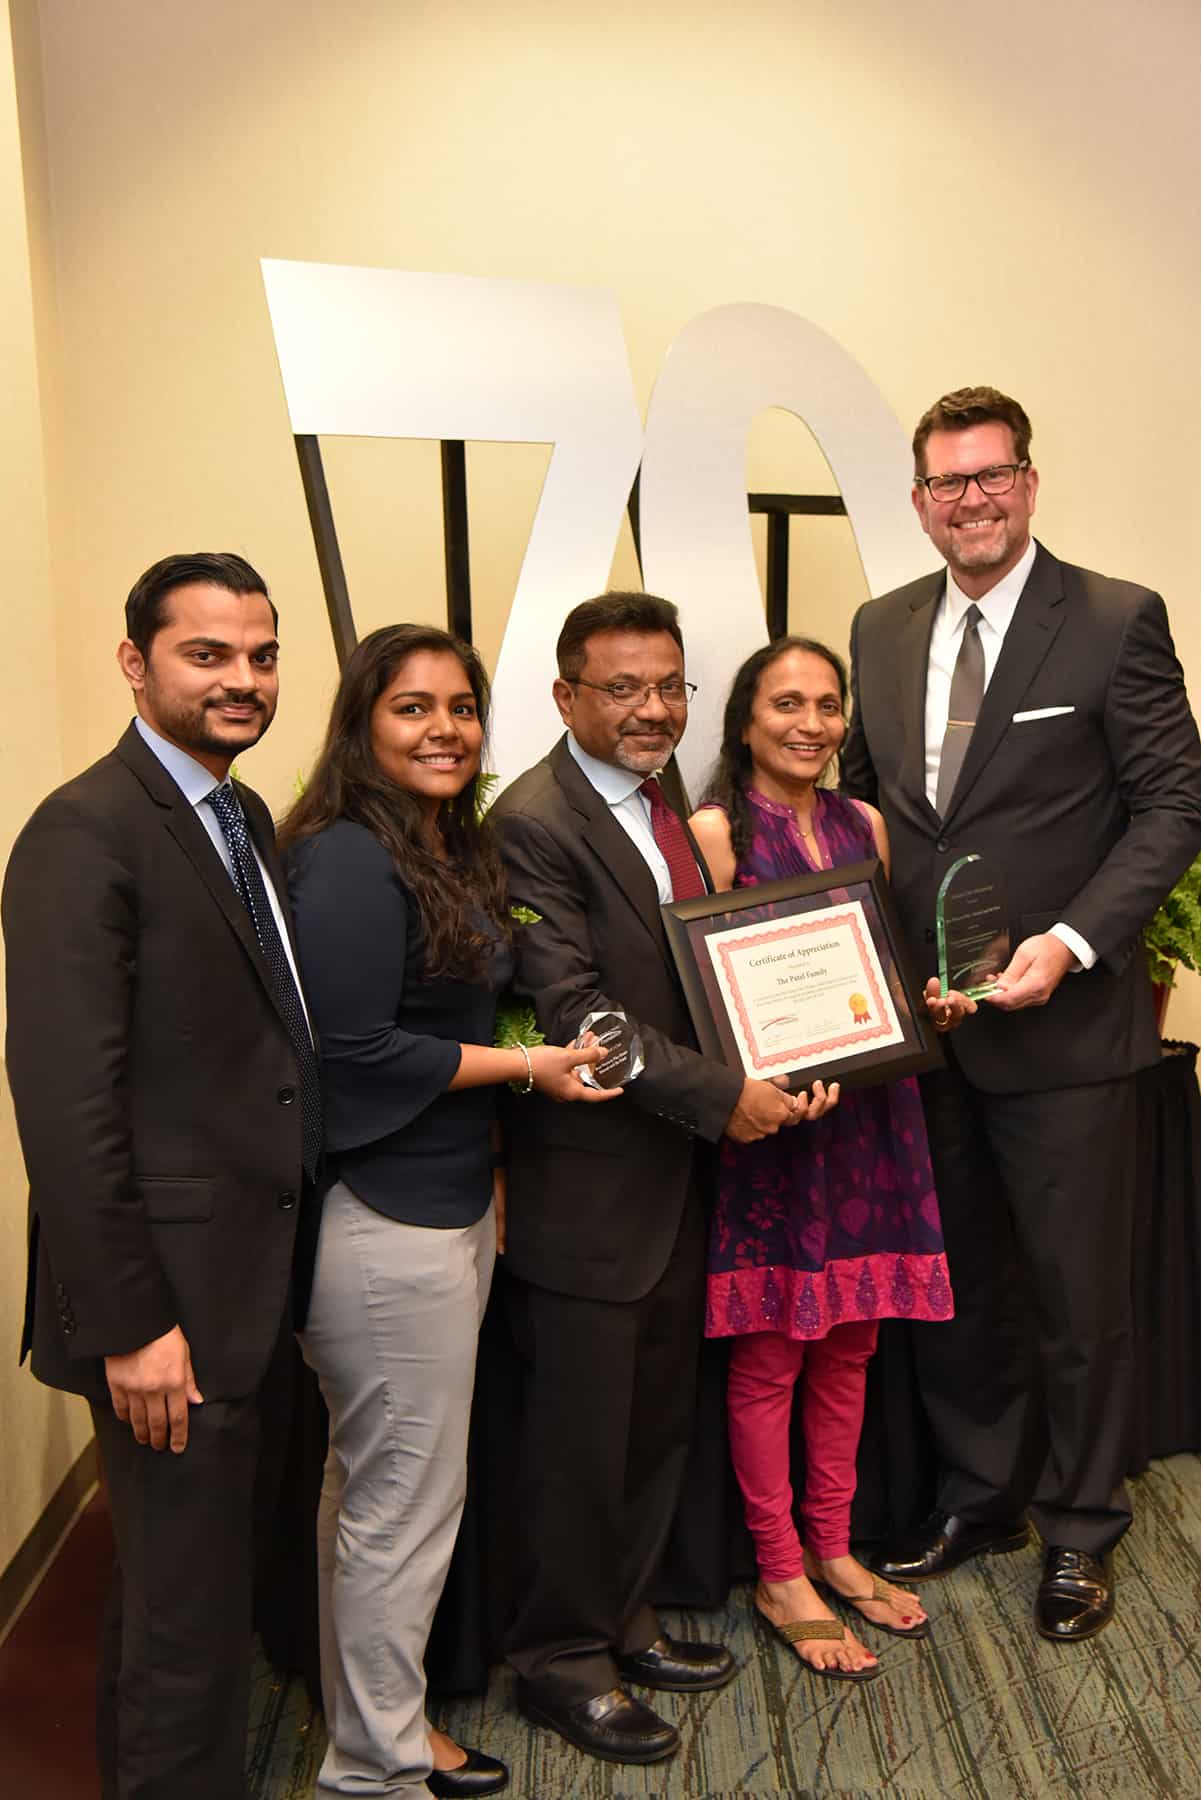 SGTC President Dr. John Watford is shown above (r) with Mr. and Mrs. Rushabh Patel and Mr. and Mrs. Sharad Patel who were recognized at the SGTC Foundation Donor Dinner for being members of their life time giving. The Patel’s endowed the Best Western Plus Windsor Hotel scholarship for culinary arts students at South Georgia Tech. They were also recognized as members of the 2017 President’s Club.